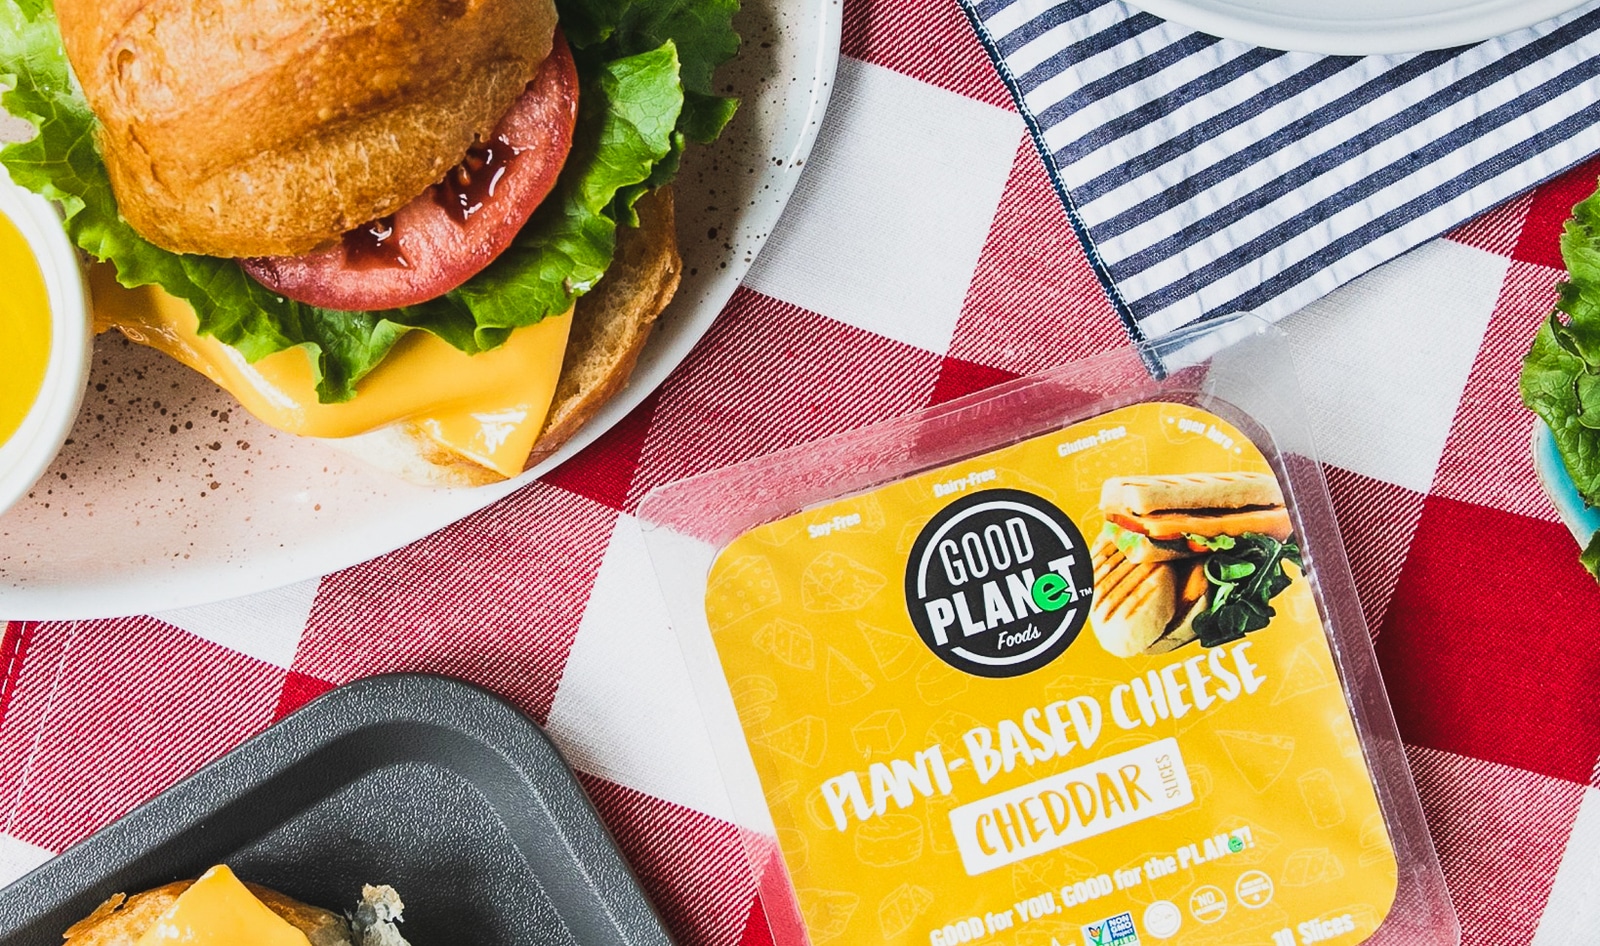 Dairy-Free Cheese Arrives at Black-Owned Burger Chain Fuddruckers Across 5 States